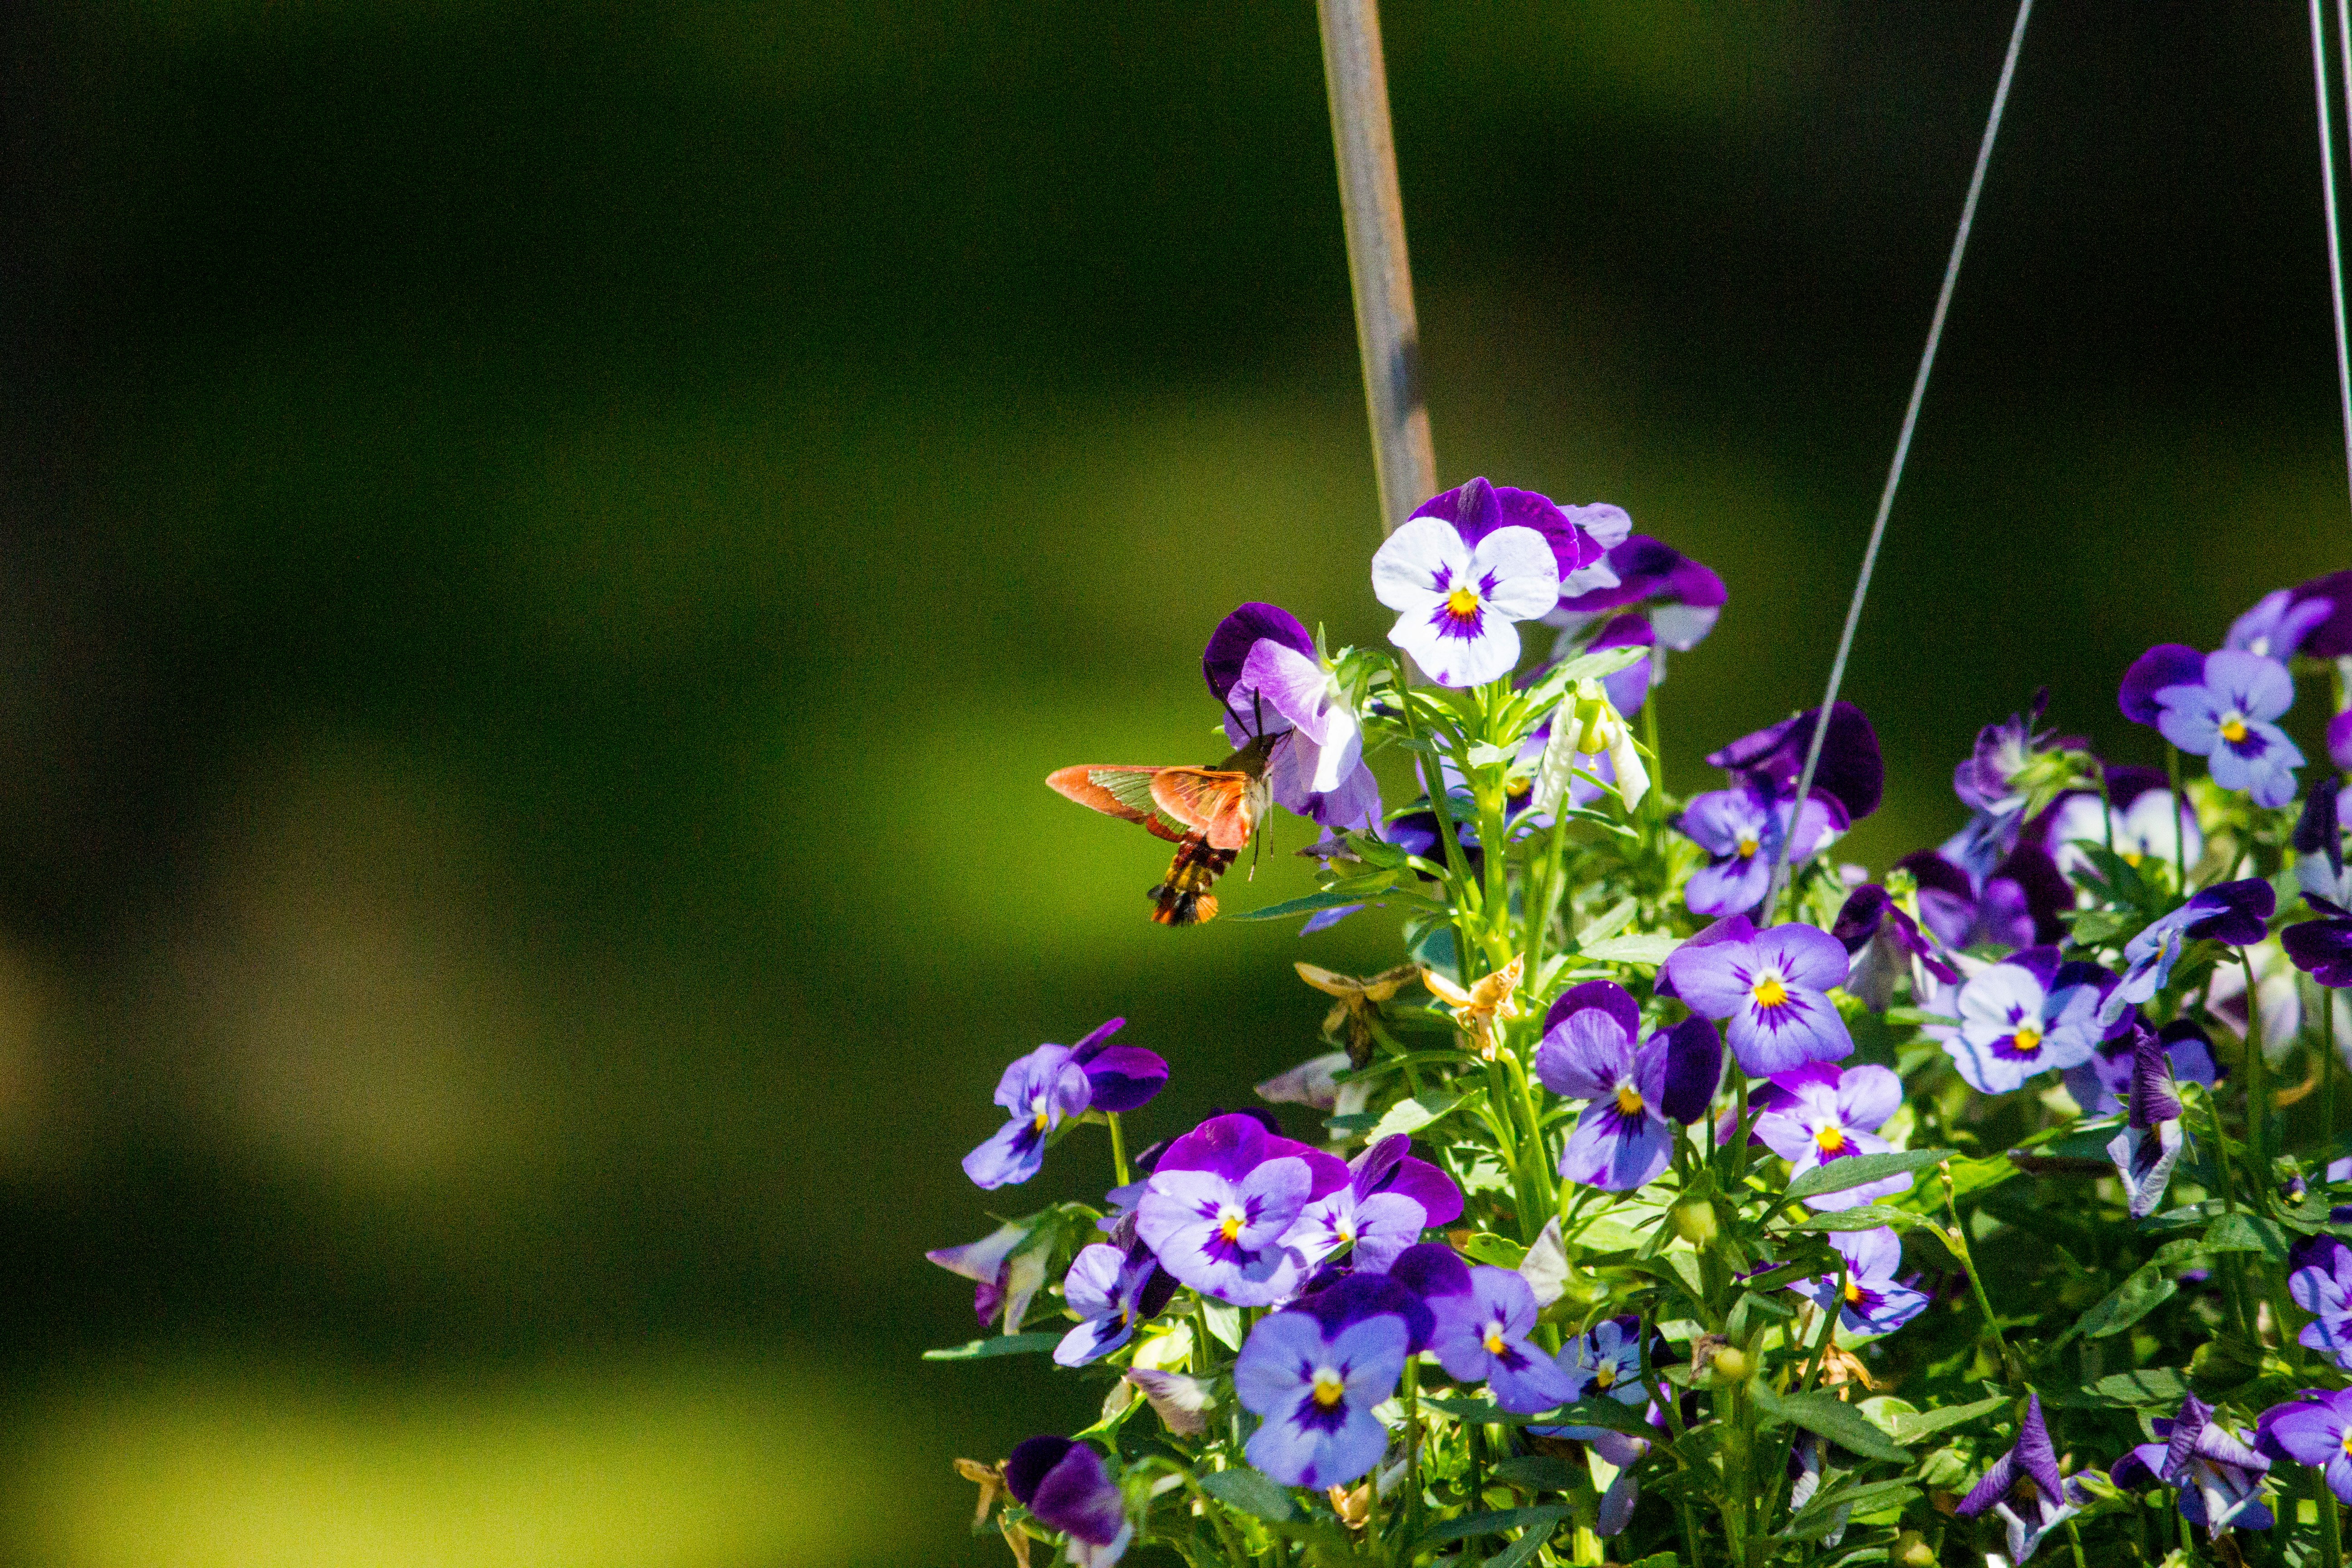 A colorful hummingbird moth visits the pansies in a hanging flower basket on the deck.